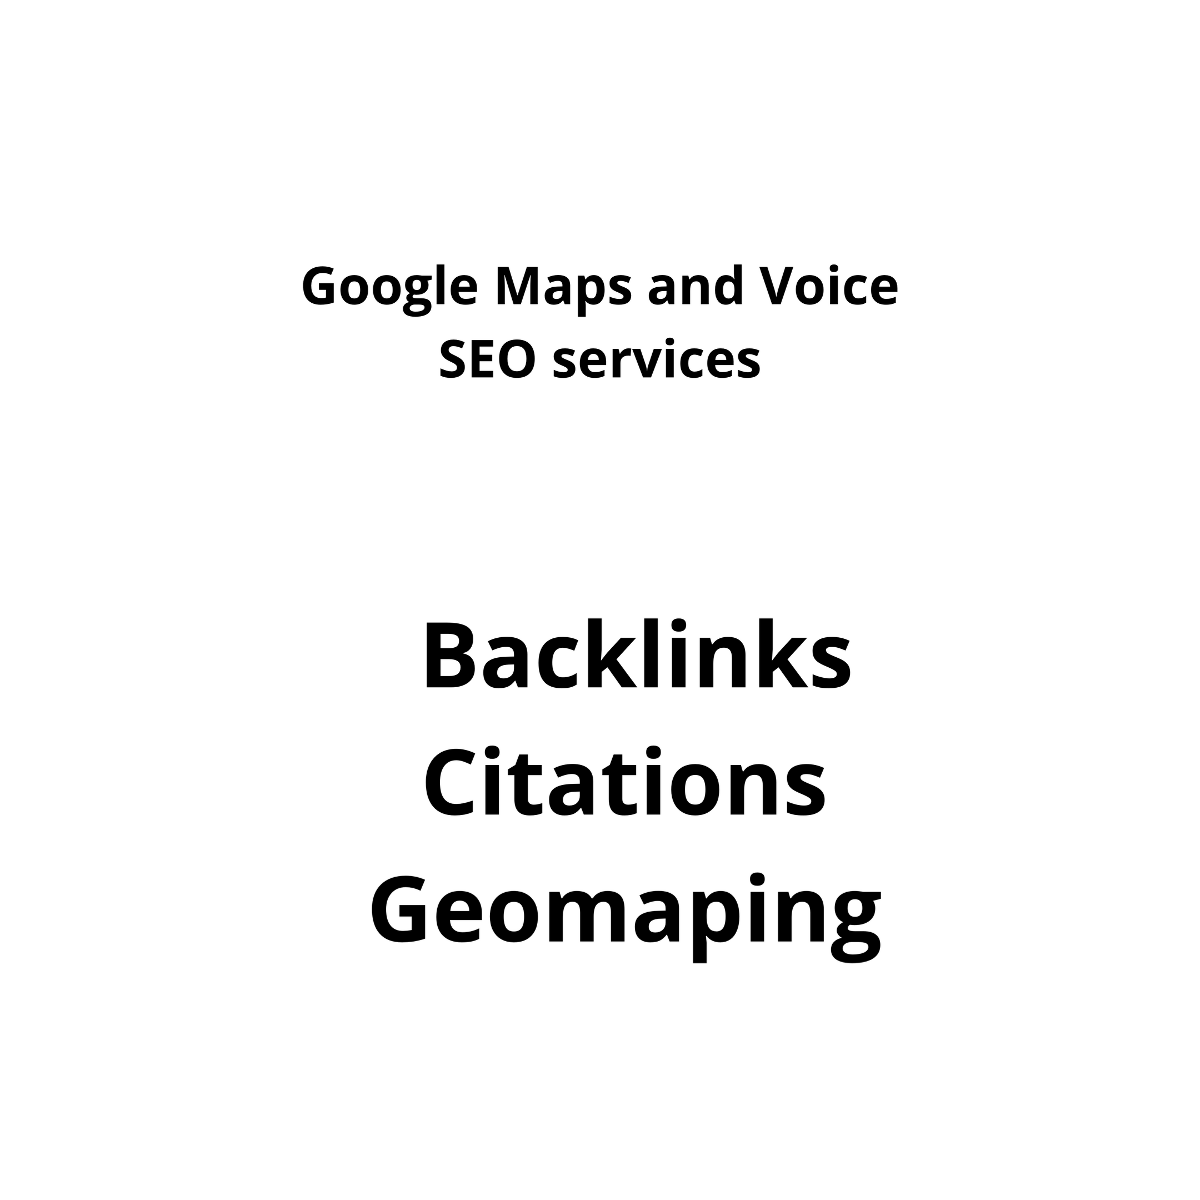 Google Map and Voice SEO services